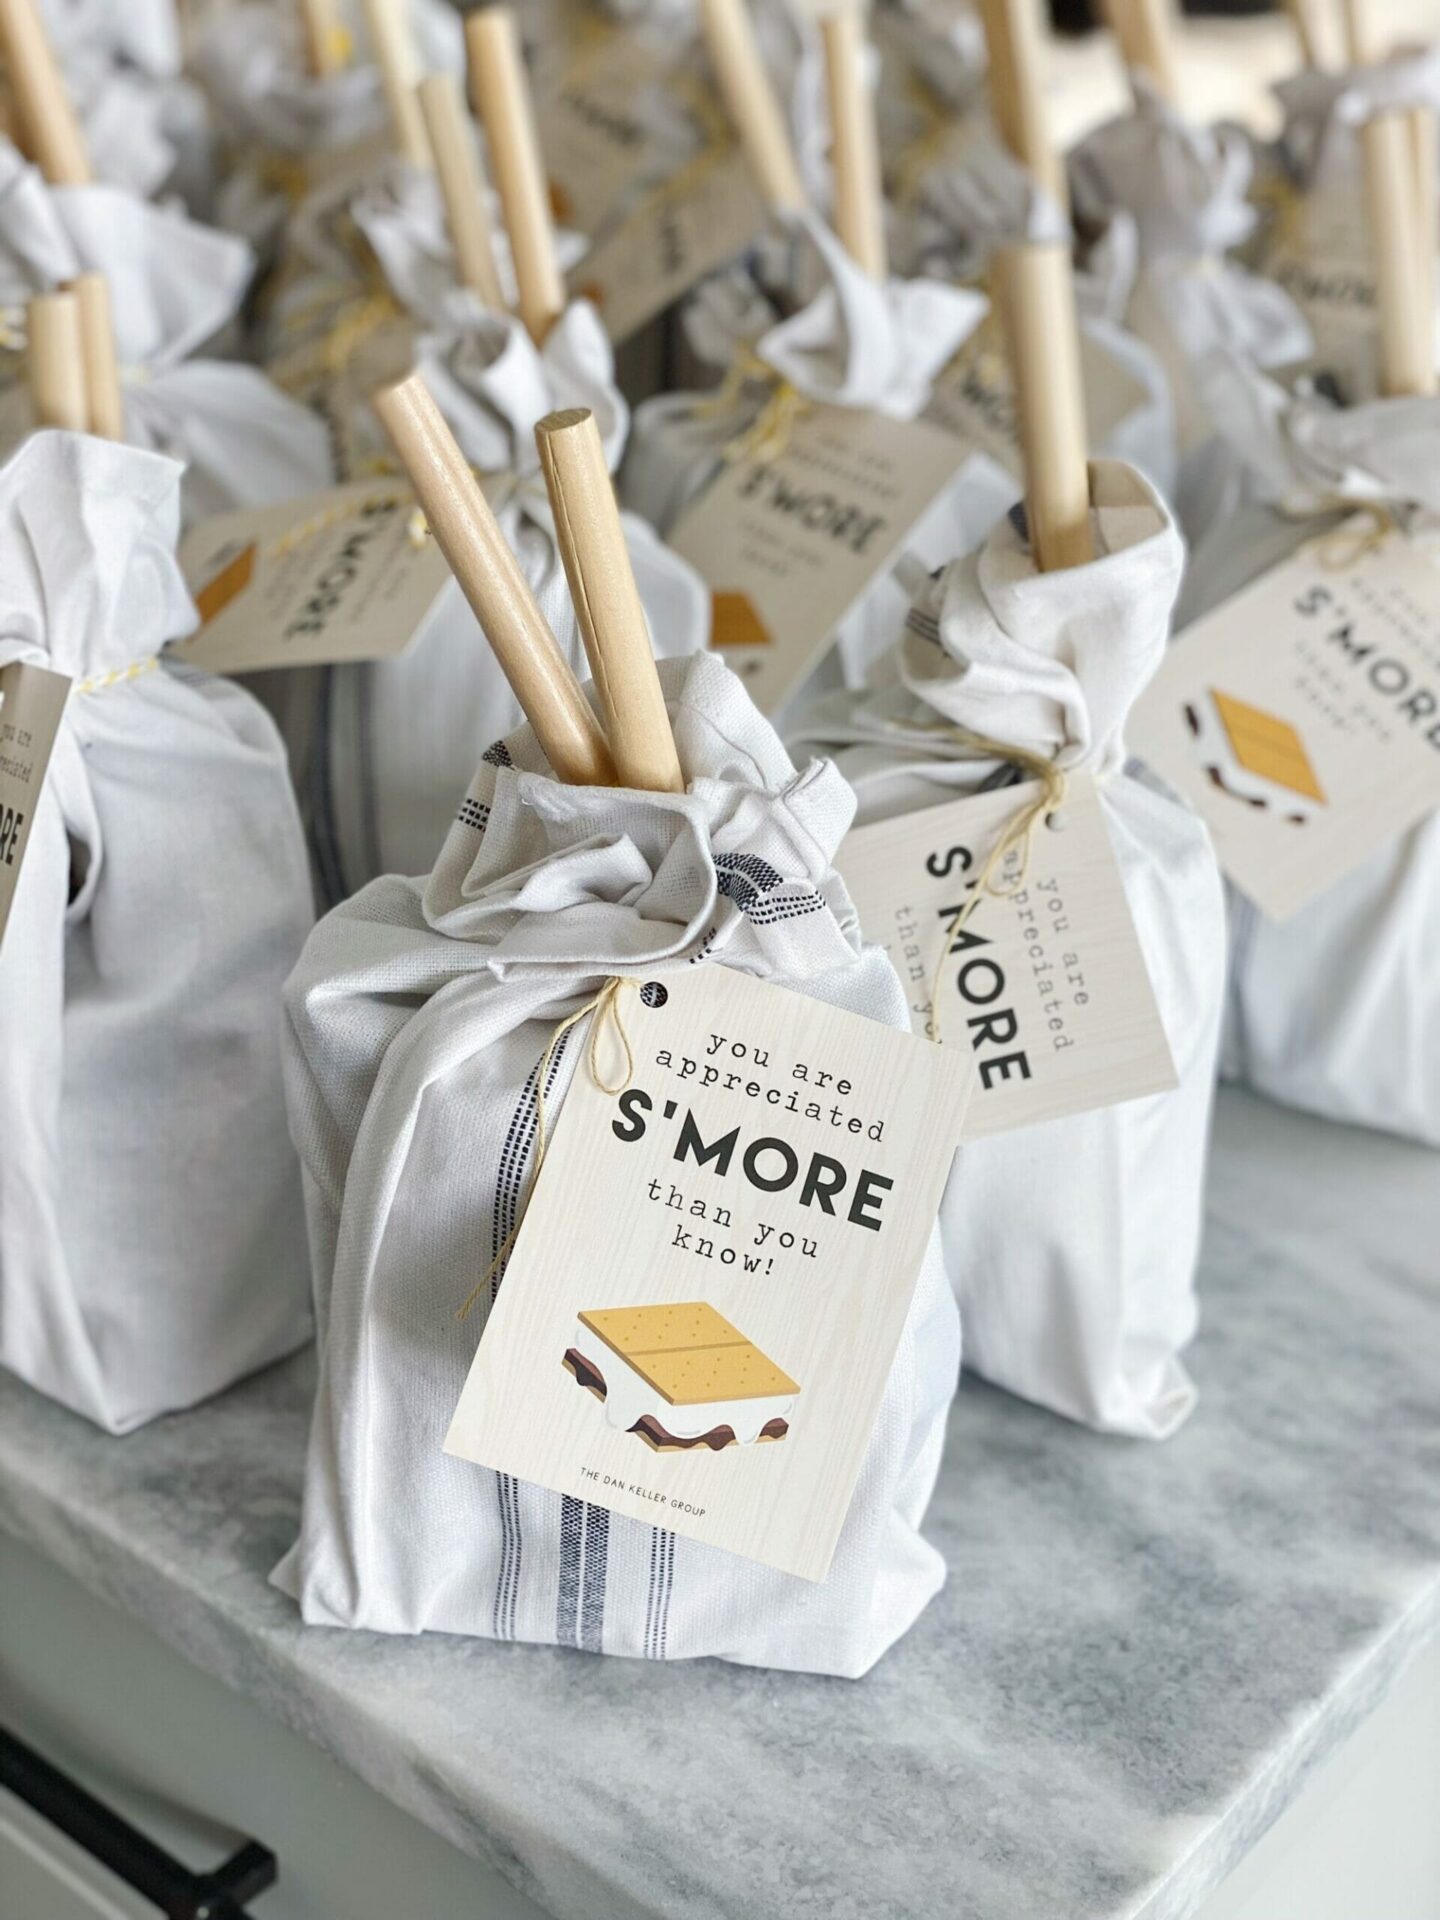 DIY Smores Kits for the Holidays - Grill Girl